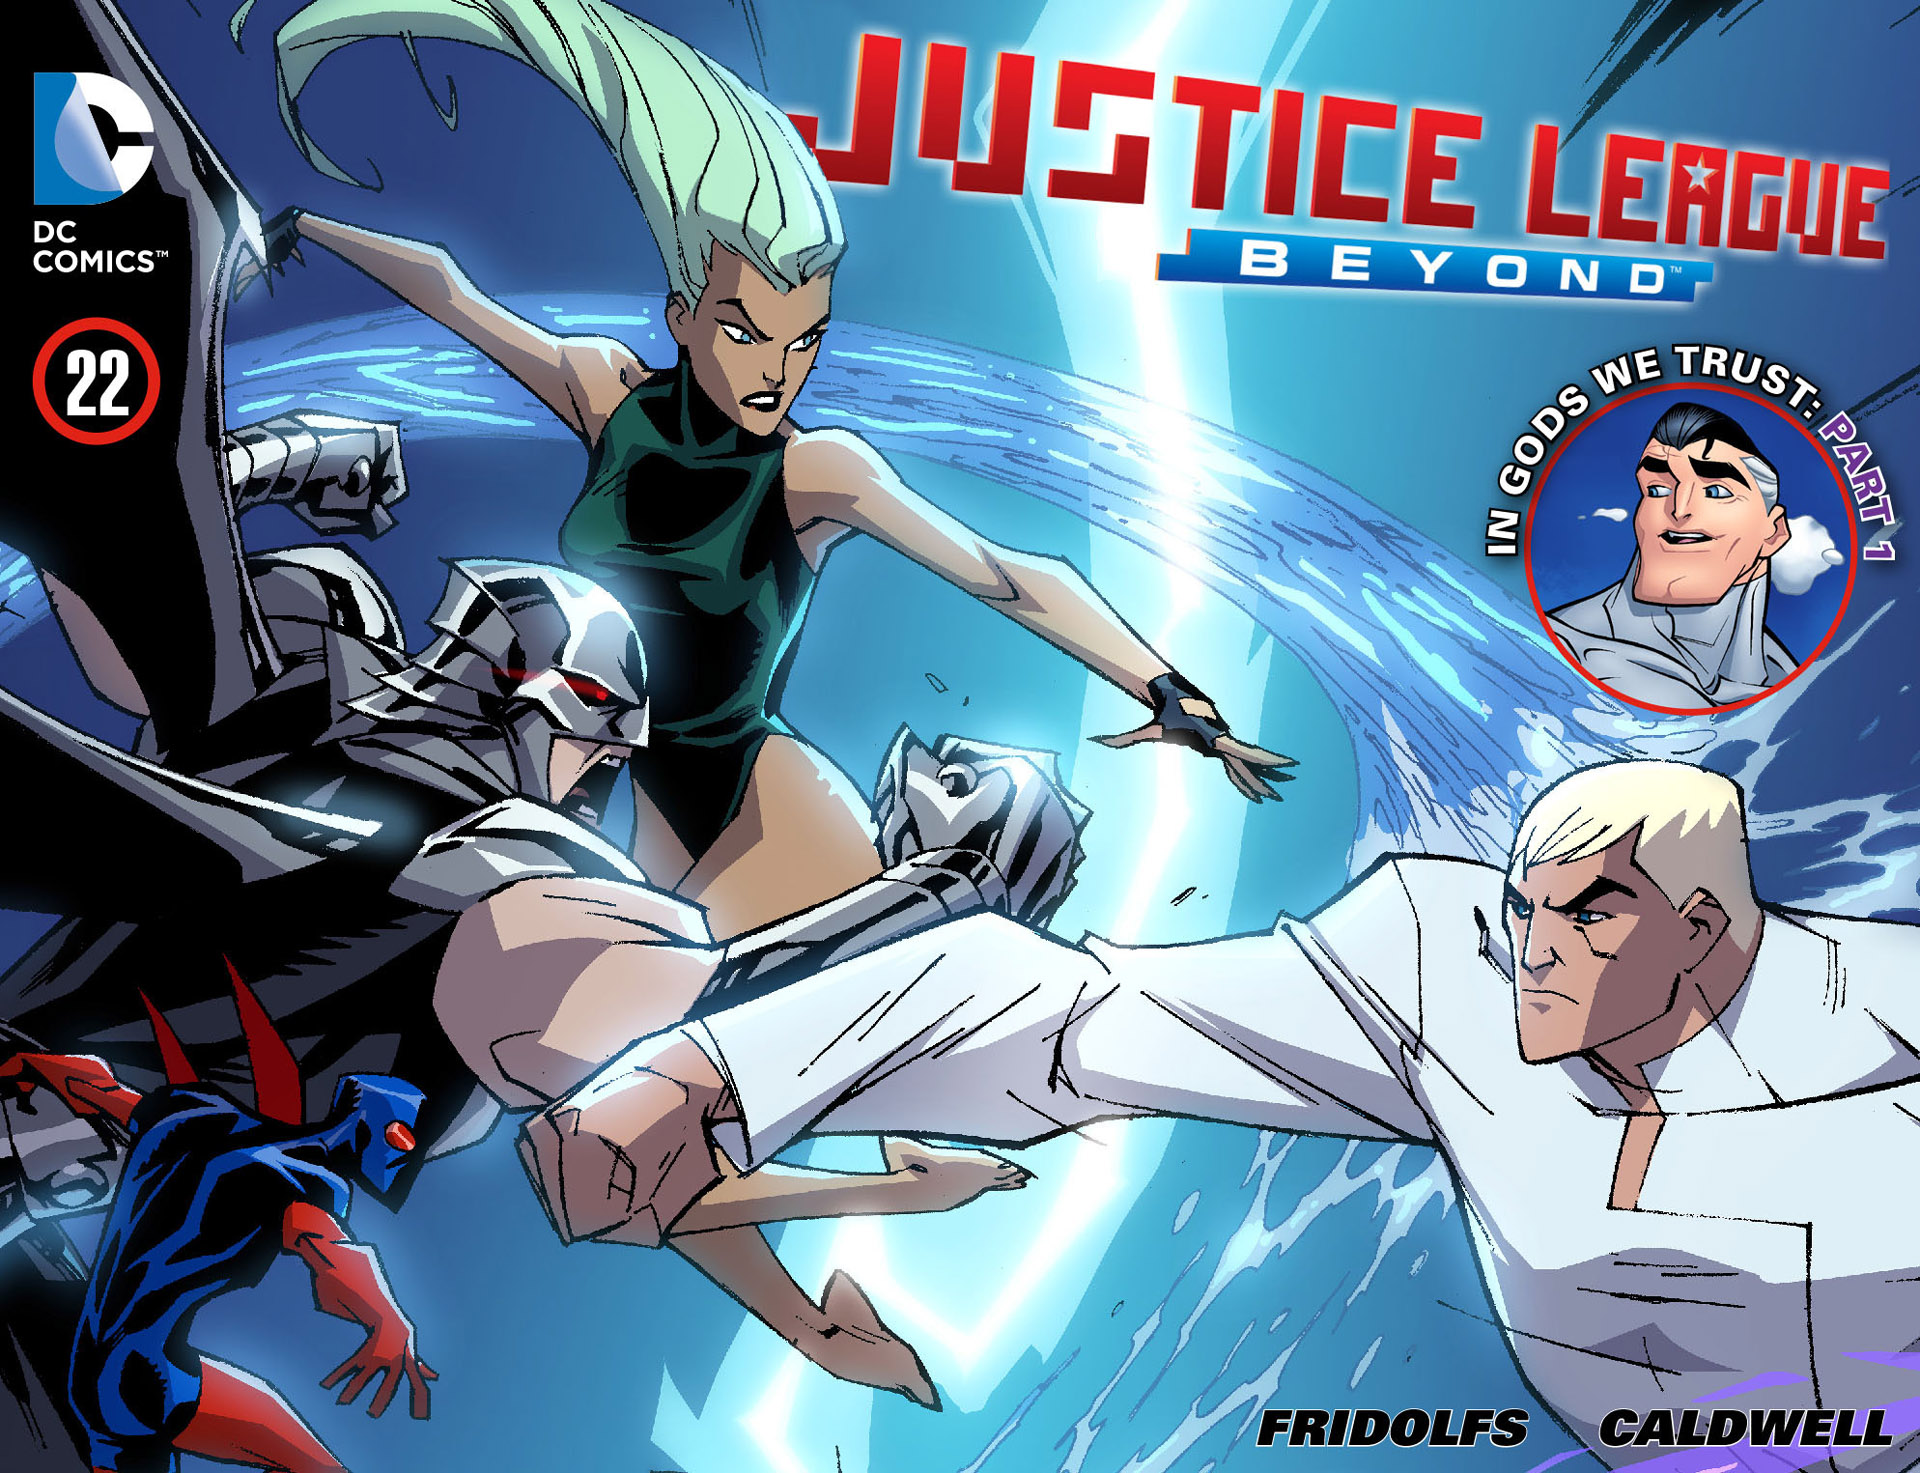 Read online Justice League Beyond comic -  Issue #22 - 1